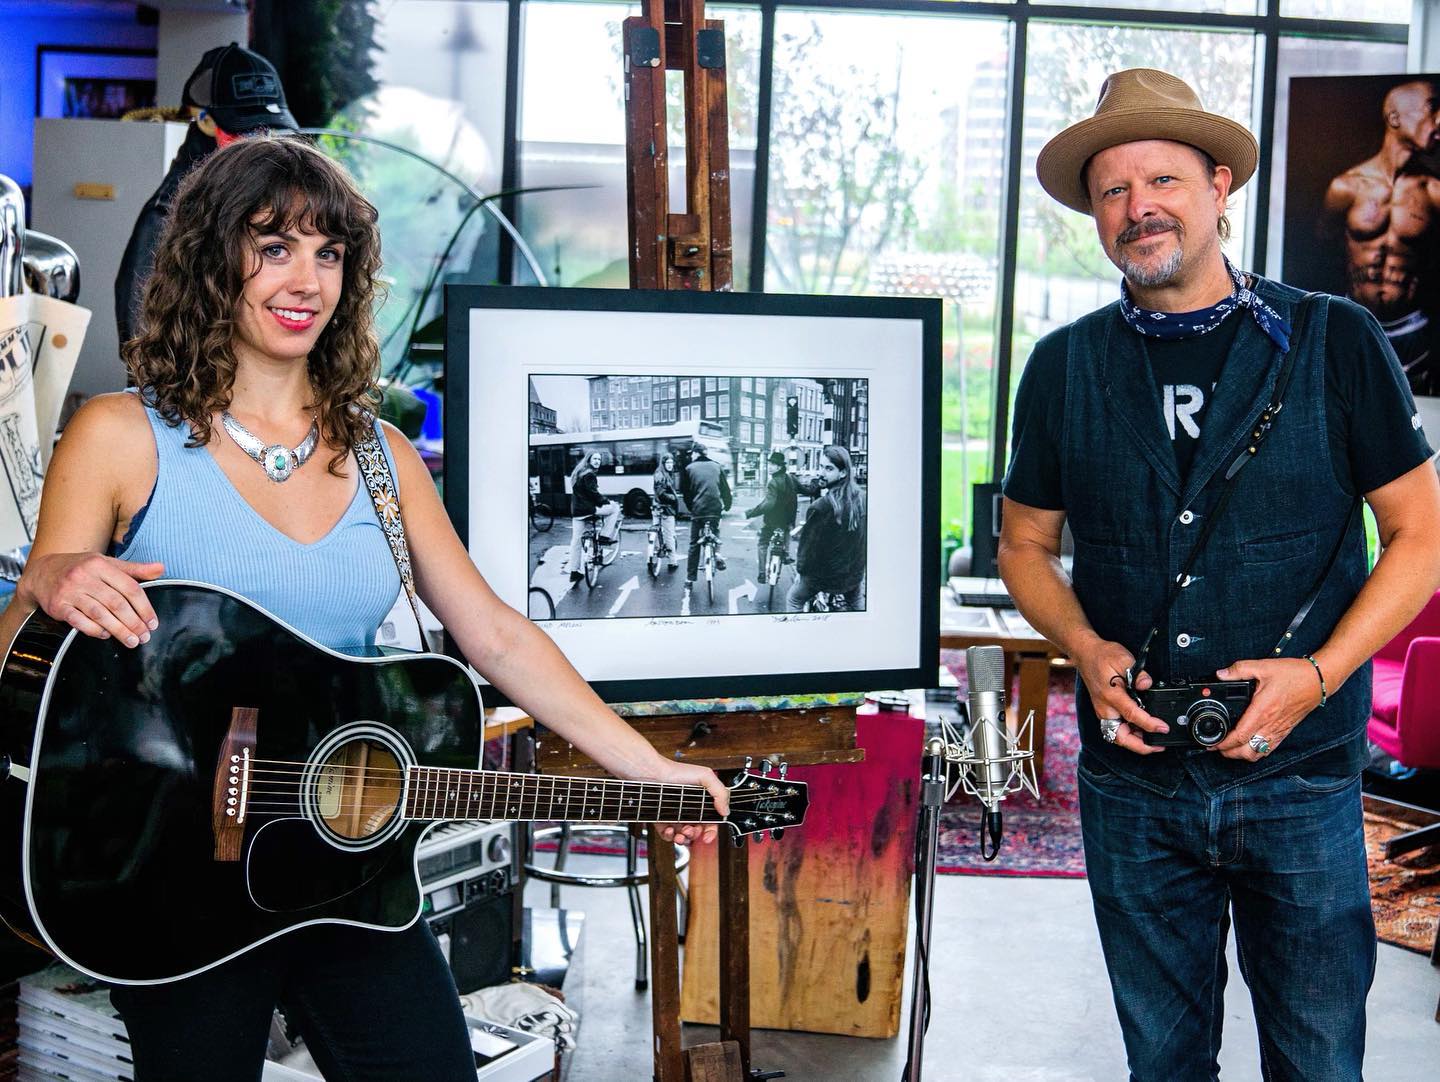 Danny Clinch And Asbury Park Area Musicians Discuss Legendary Artists And Photographs In “Locals And Icons”